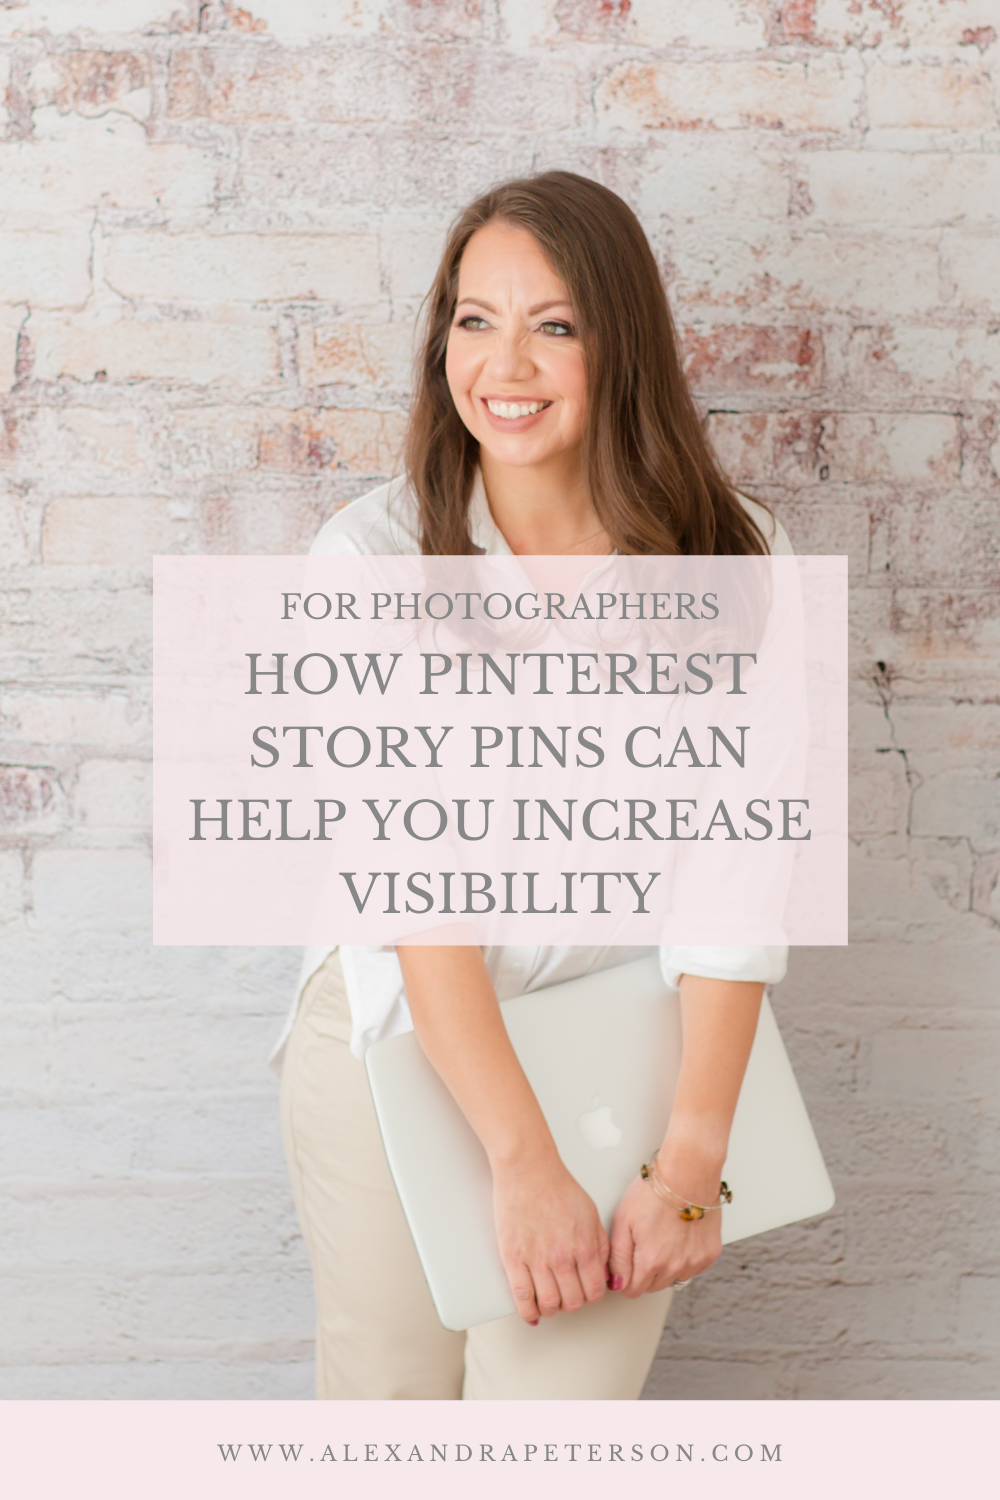 How Pinterest Story Pins Can Help You Increase Visibility